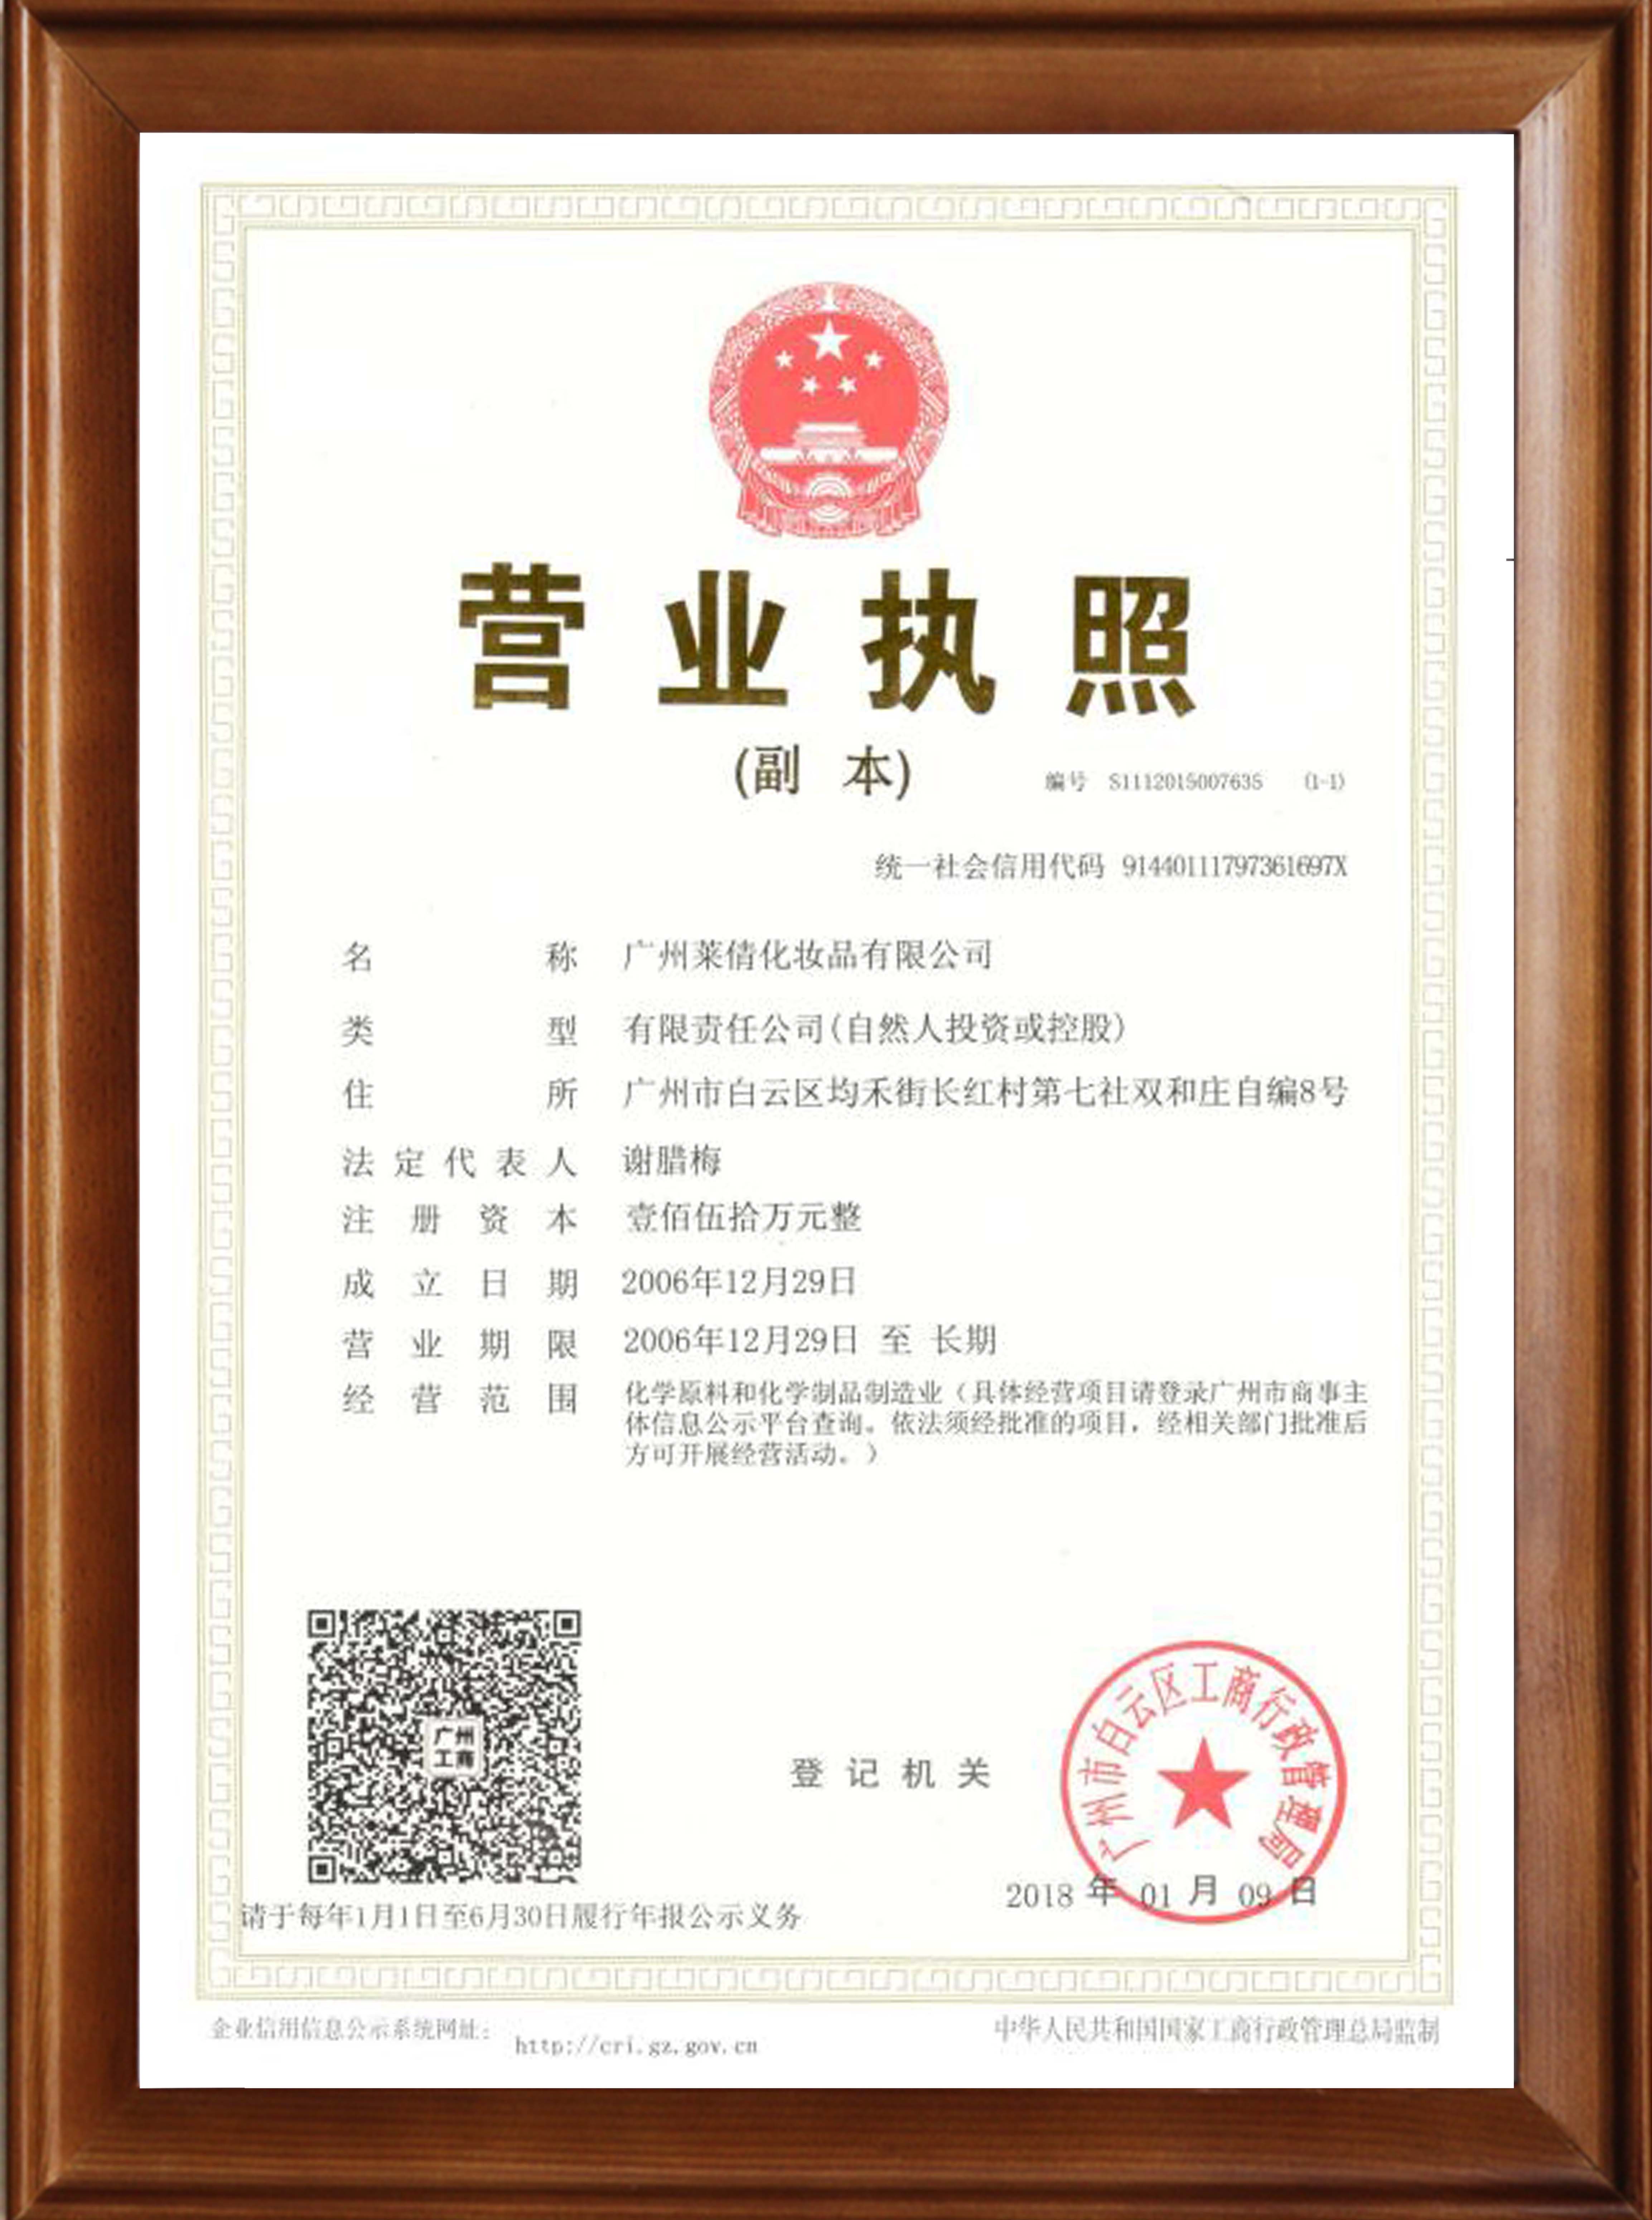 Business license of Natural beauty